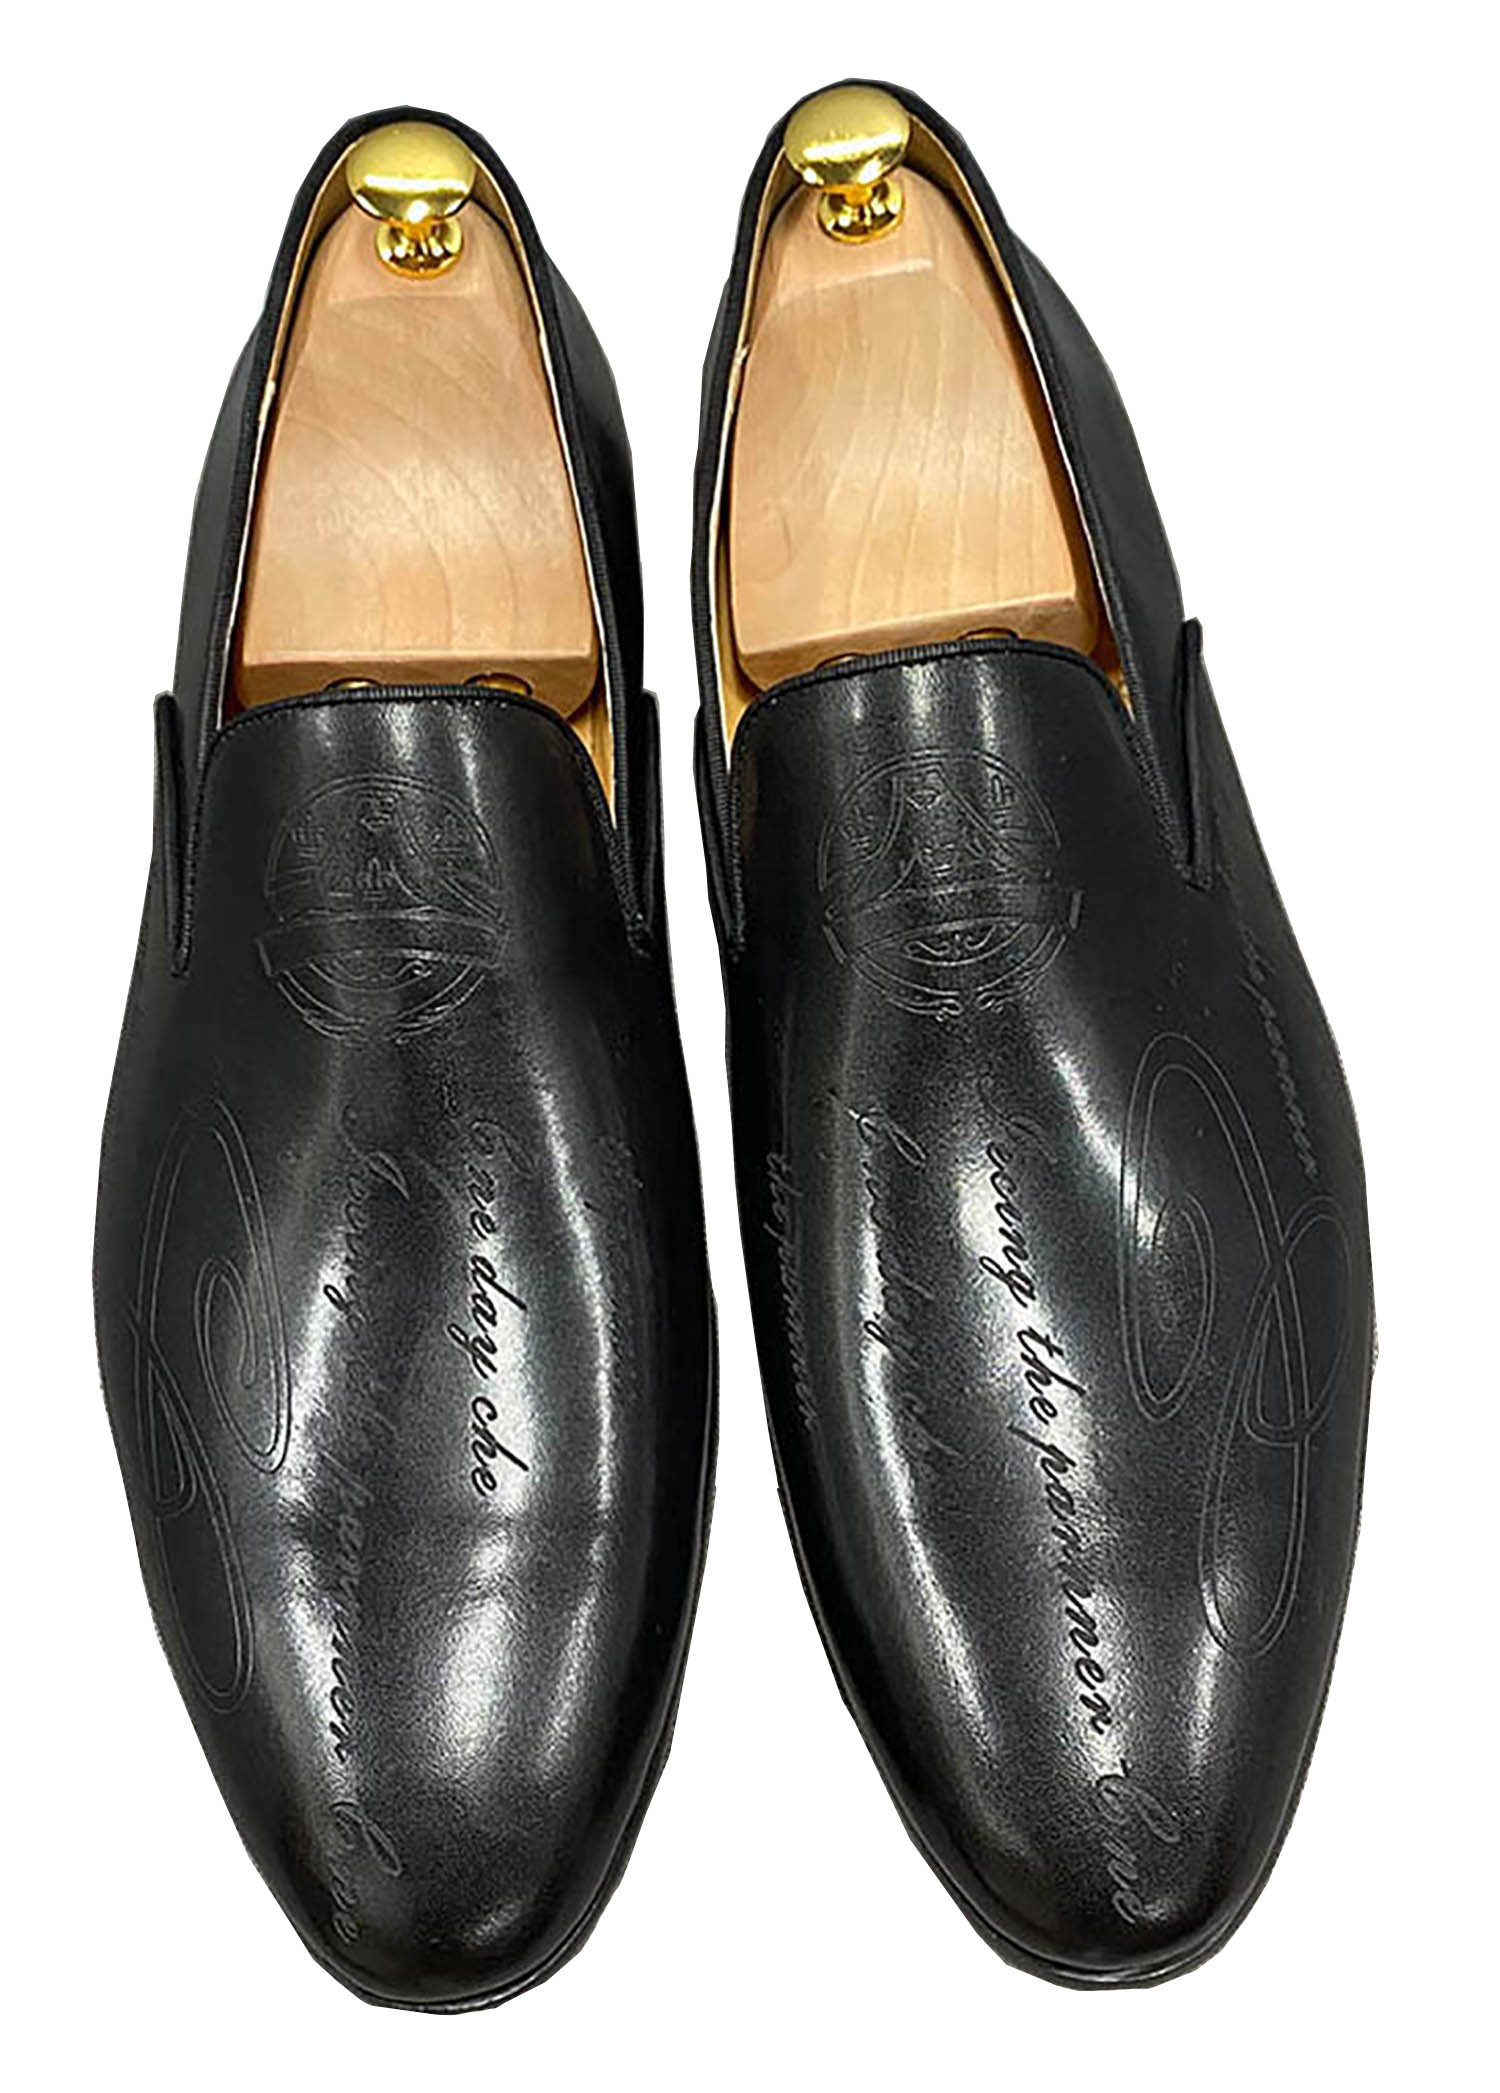 Men's Dress Formal Hand-Painted Penny Loafers